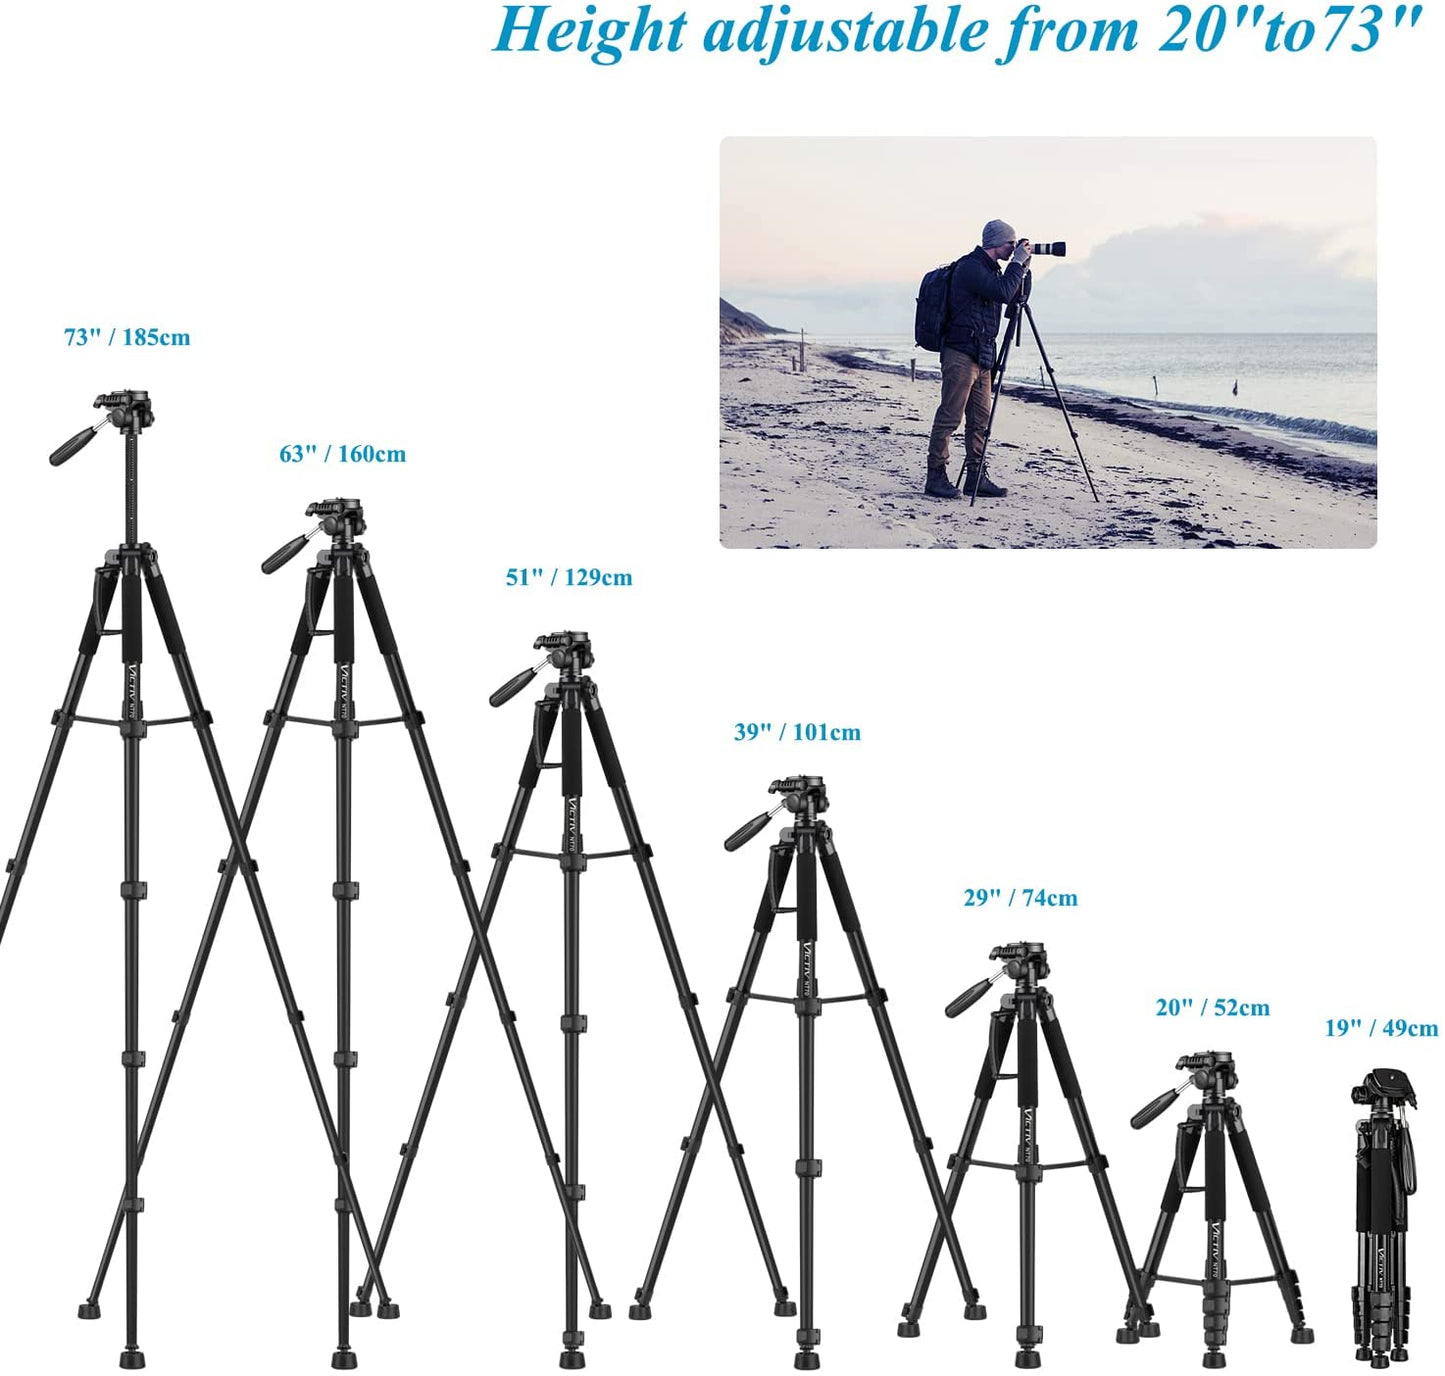 Victiv Camera Tripod 63-73" for Canon Nikon, Lightweight DSLR Camera Stand with Detachable 3-way Swivel Pan Head Max Load 14lb/6.35kg, Aluminum Tripod with Holder and Carry Bag